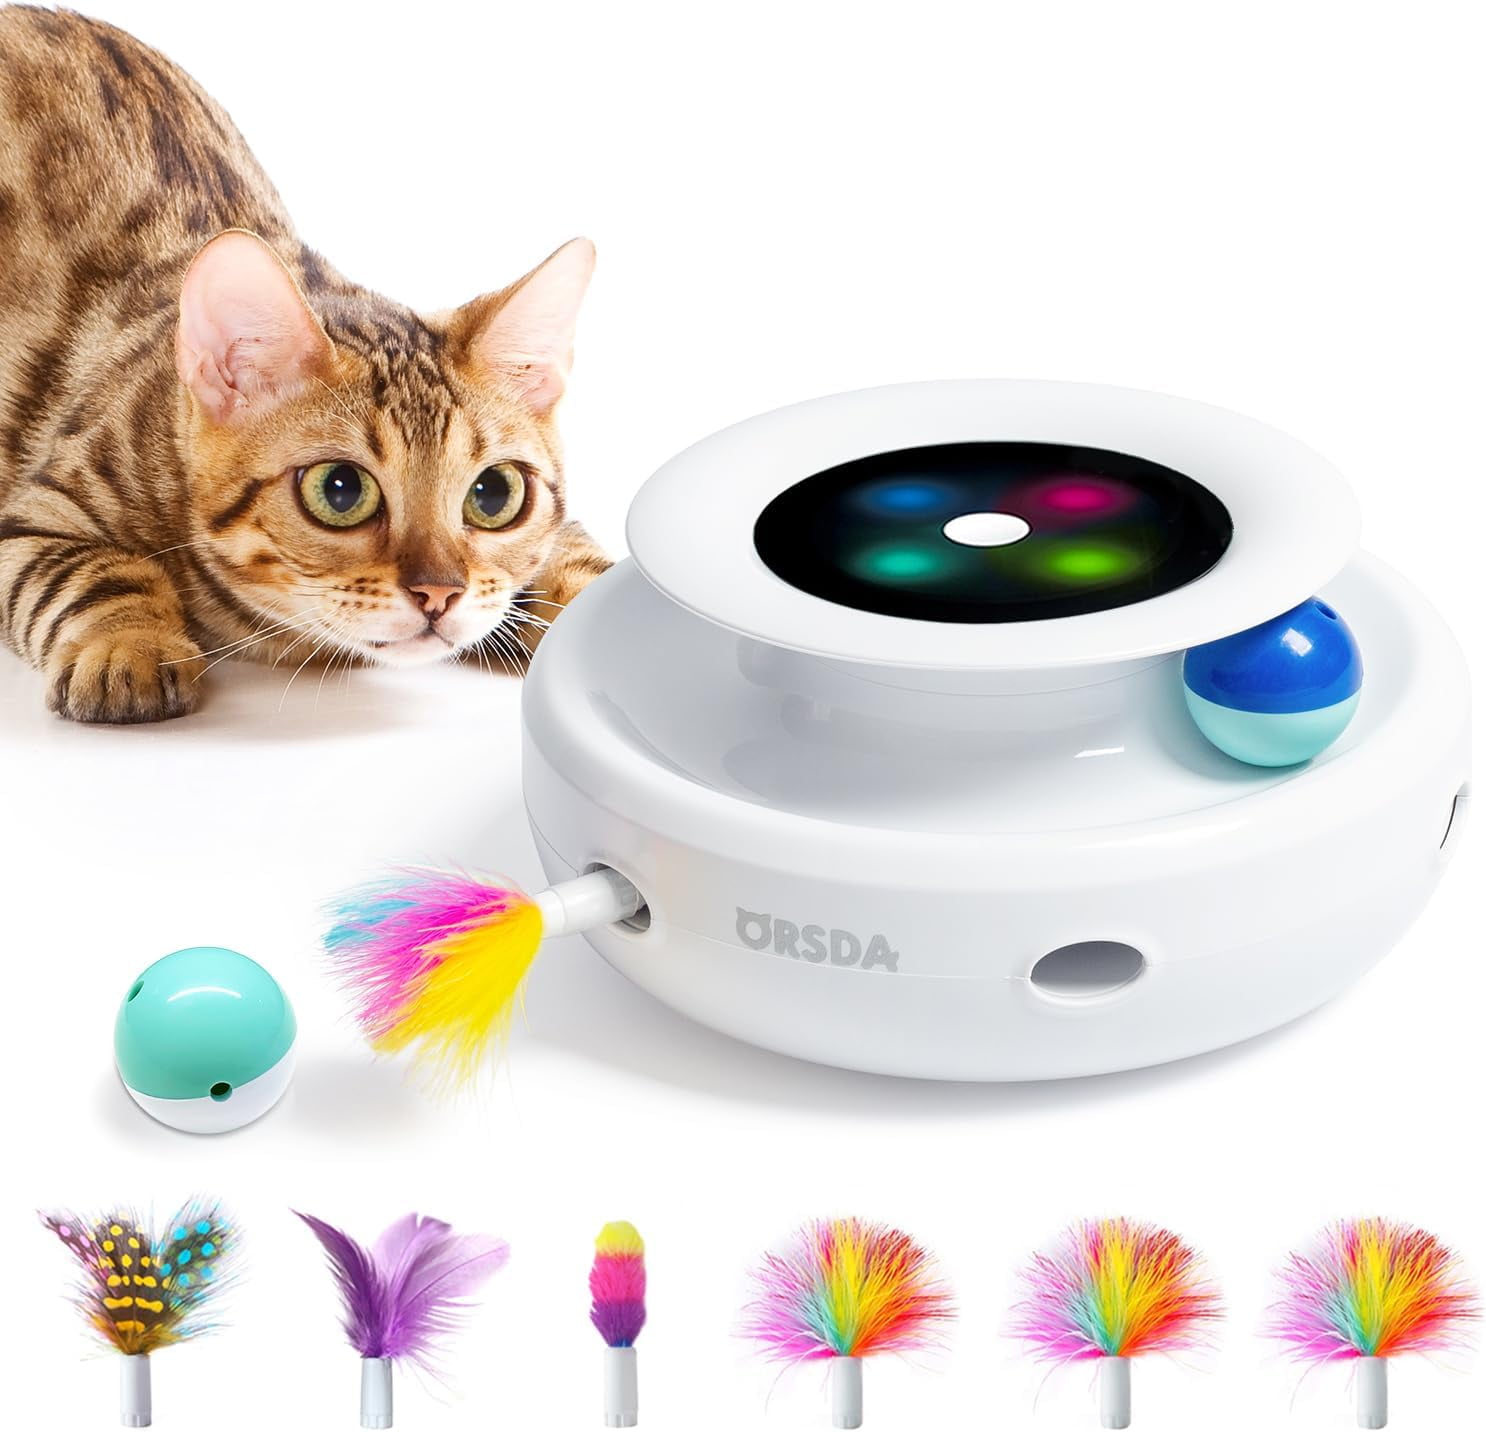 PETDURO Spinning Cat Toys for Kittens Toothbrush with Light Balls, Bel